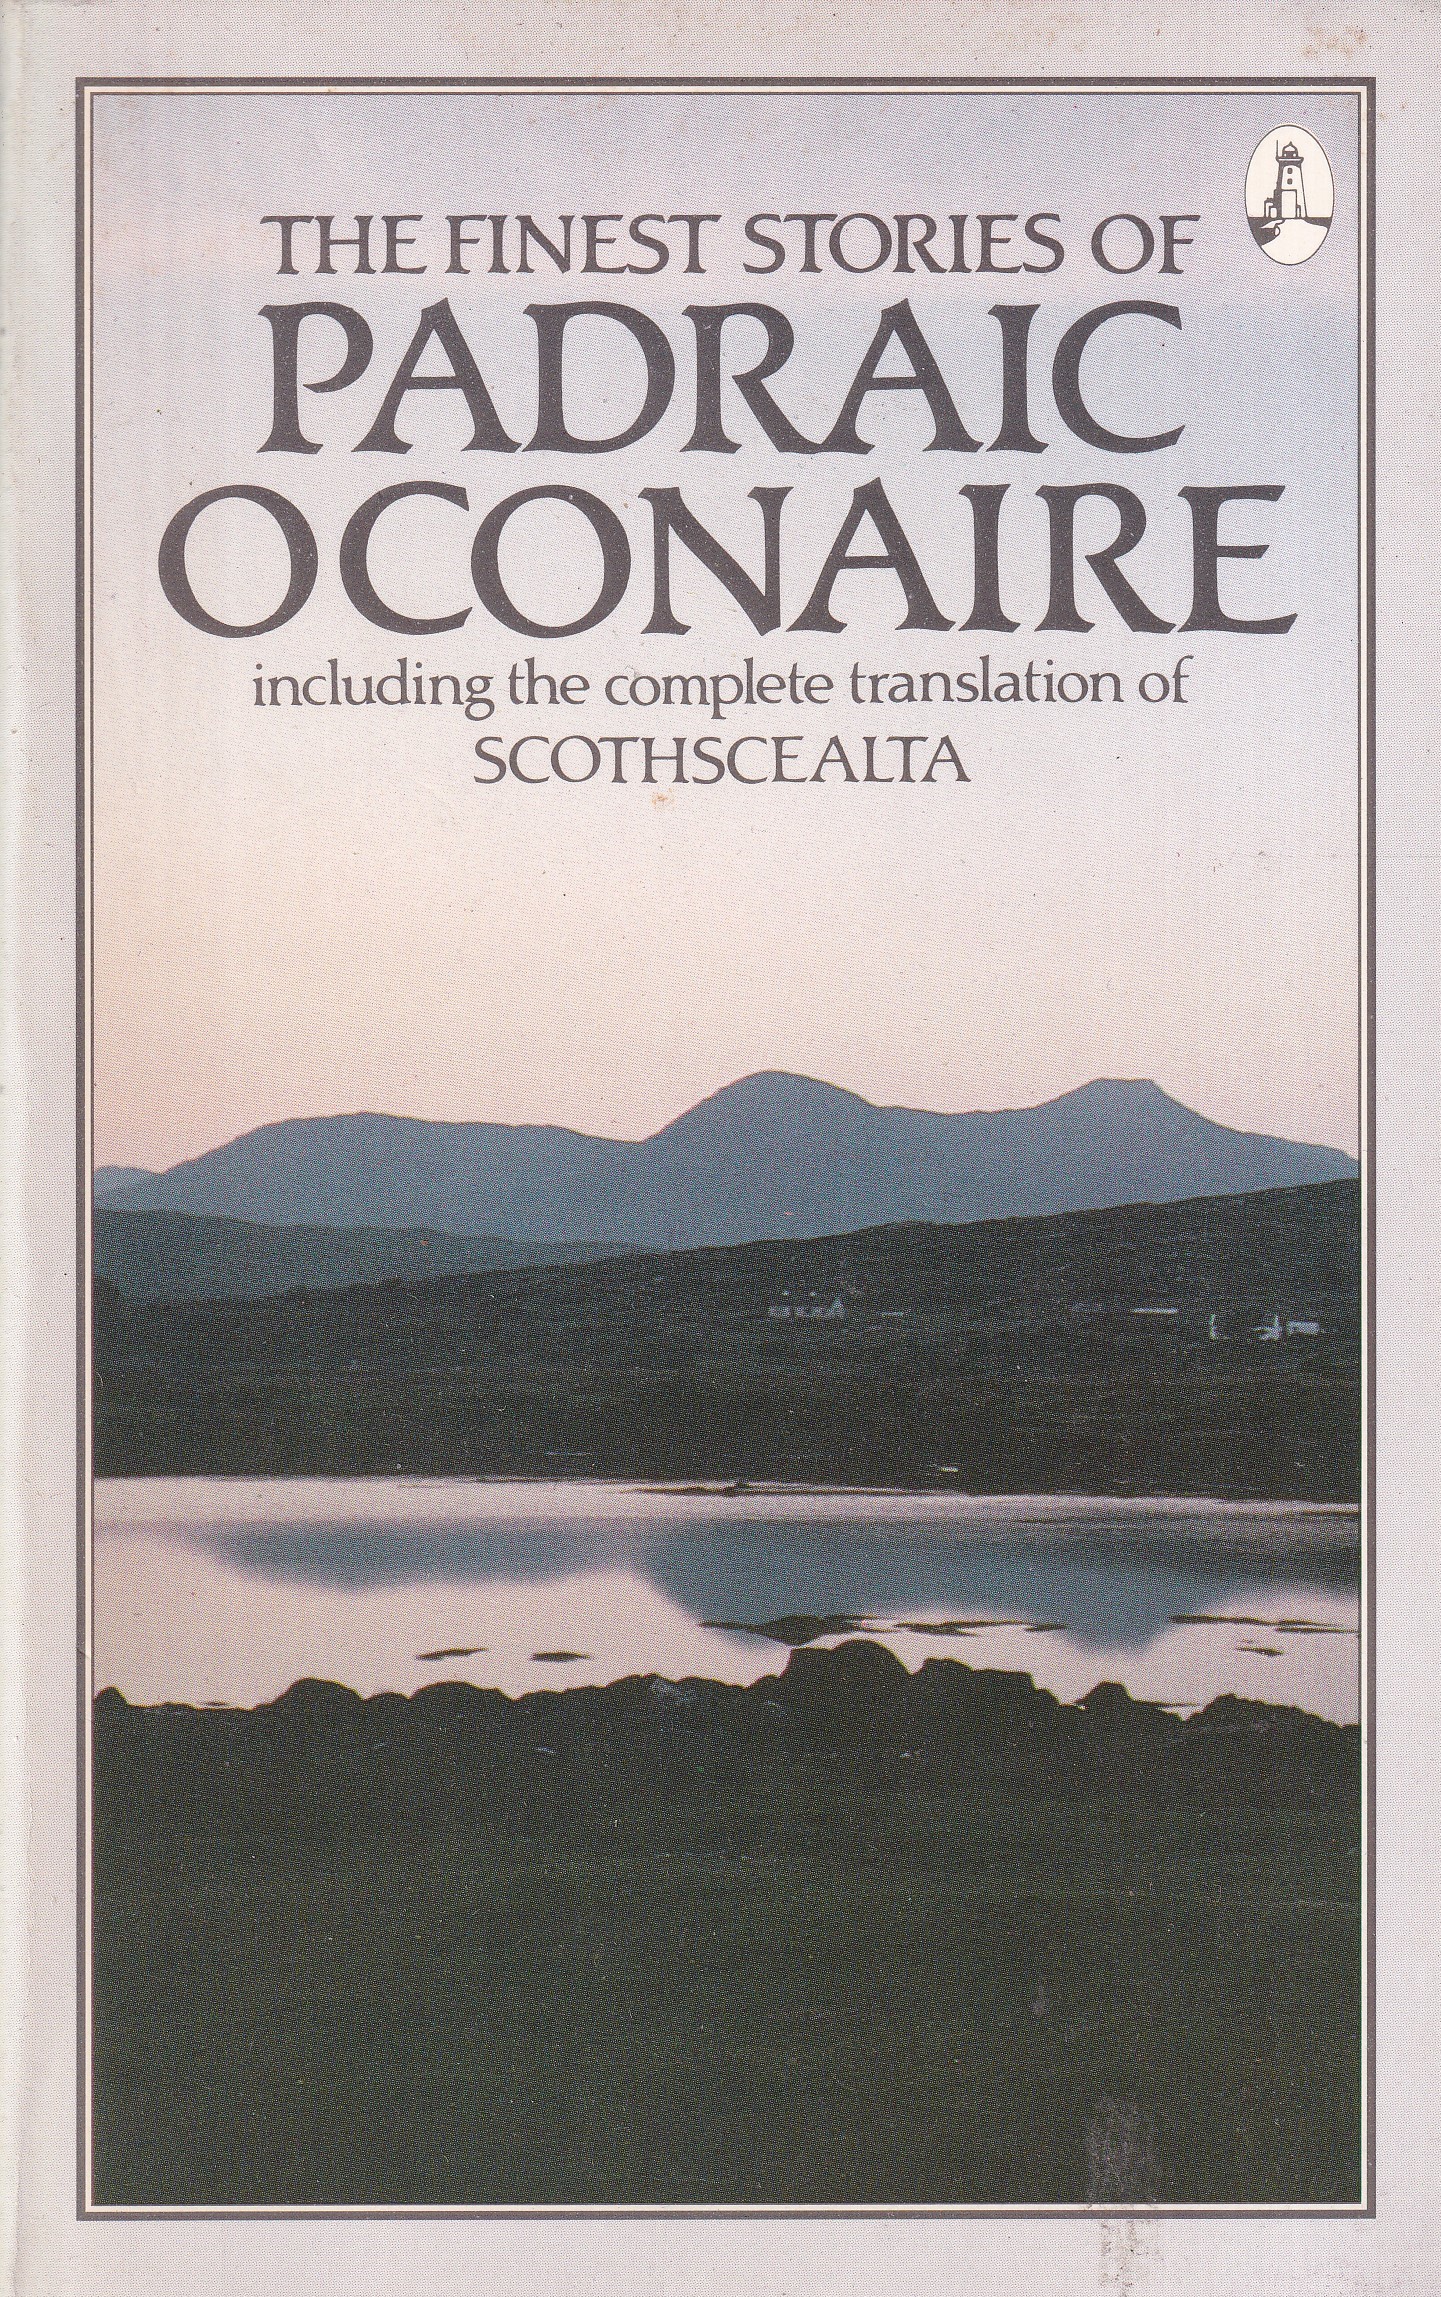 The Finest Stories of Padraic O’Conaire | Padraic O'Conaire | Charlie Byrne's